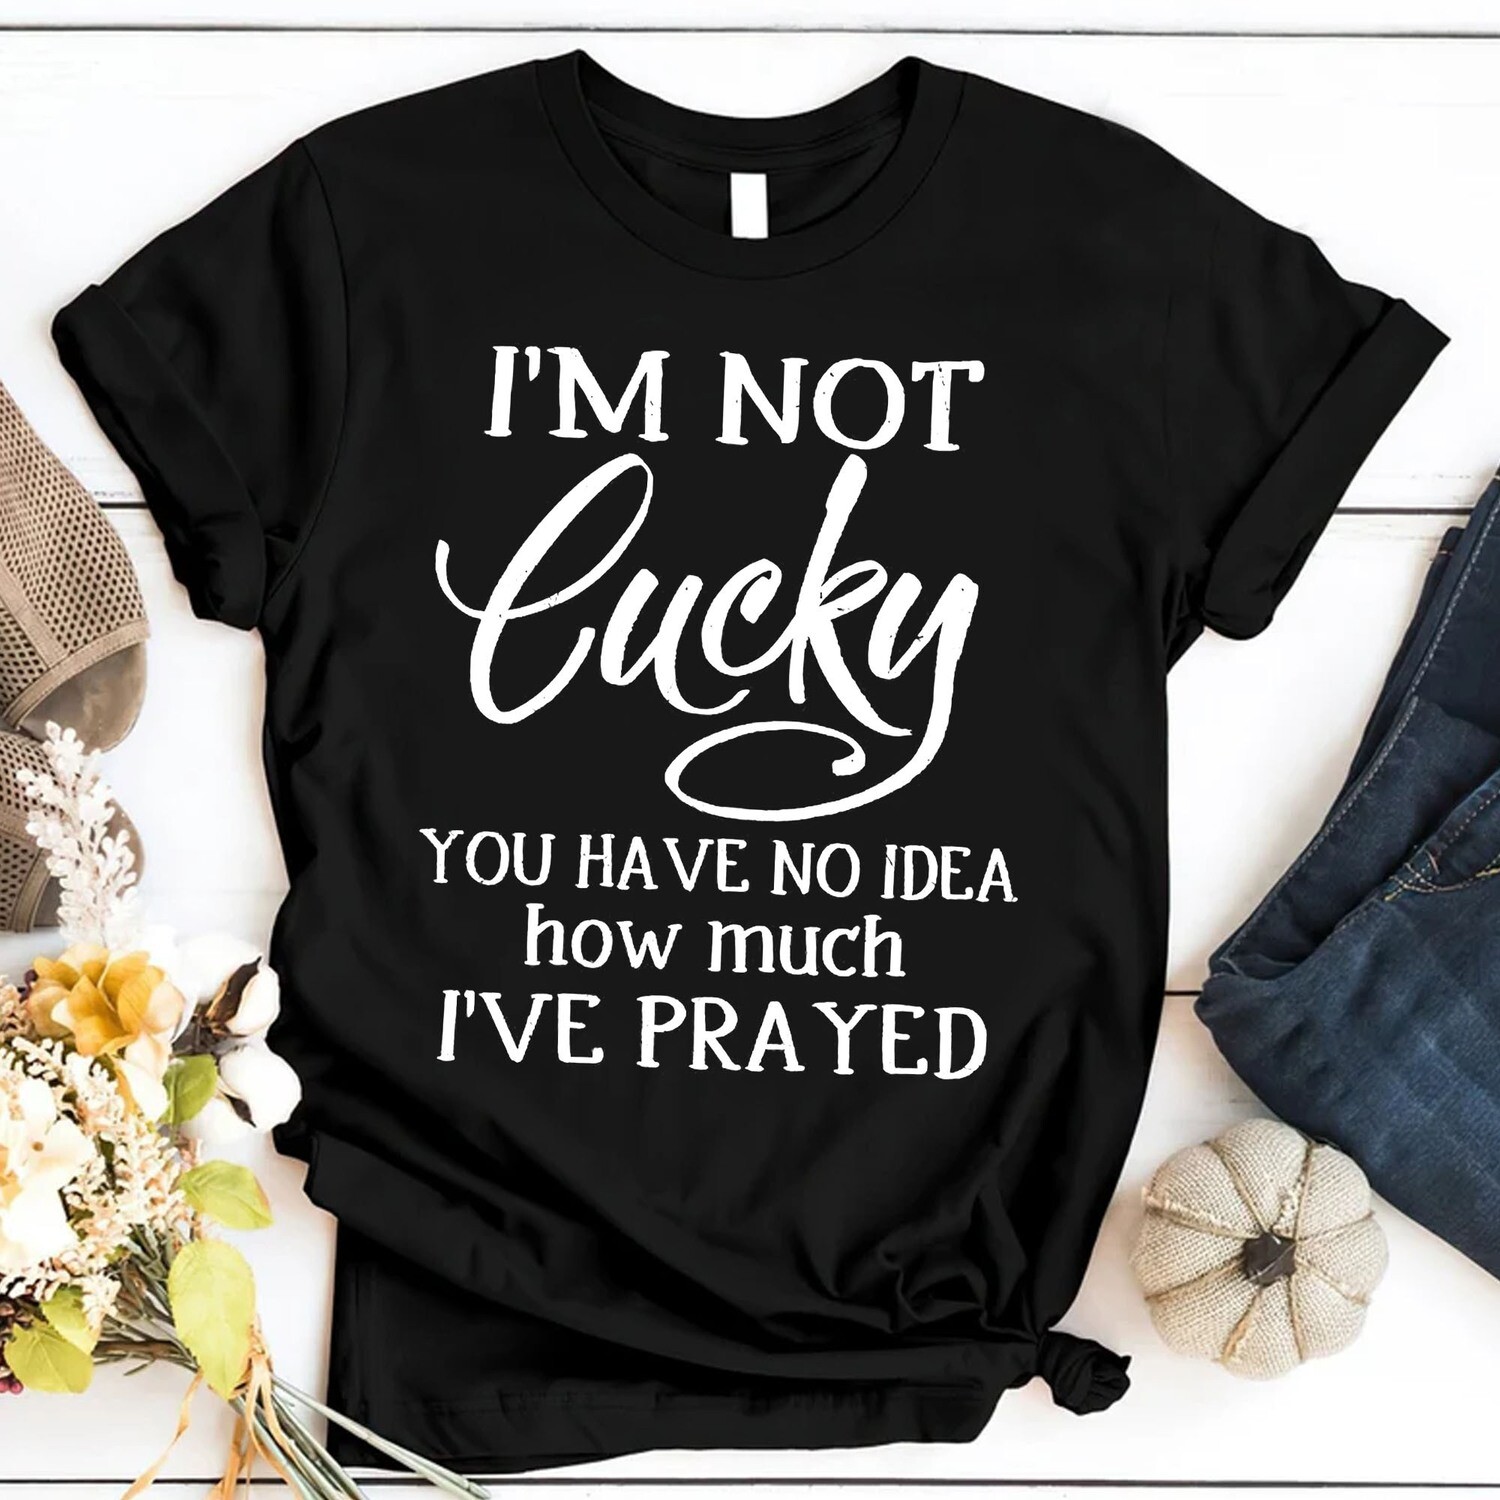 I'm Not Lucky. You Have No Idea How Much I've Prayed Shirt